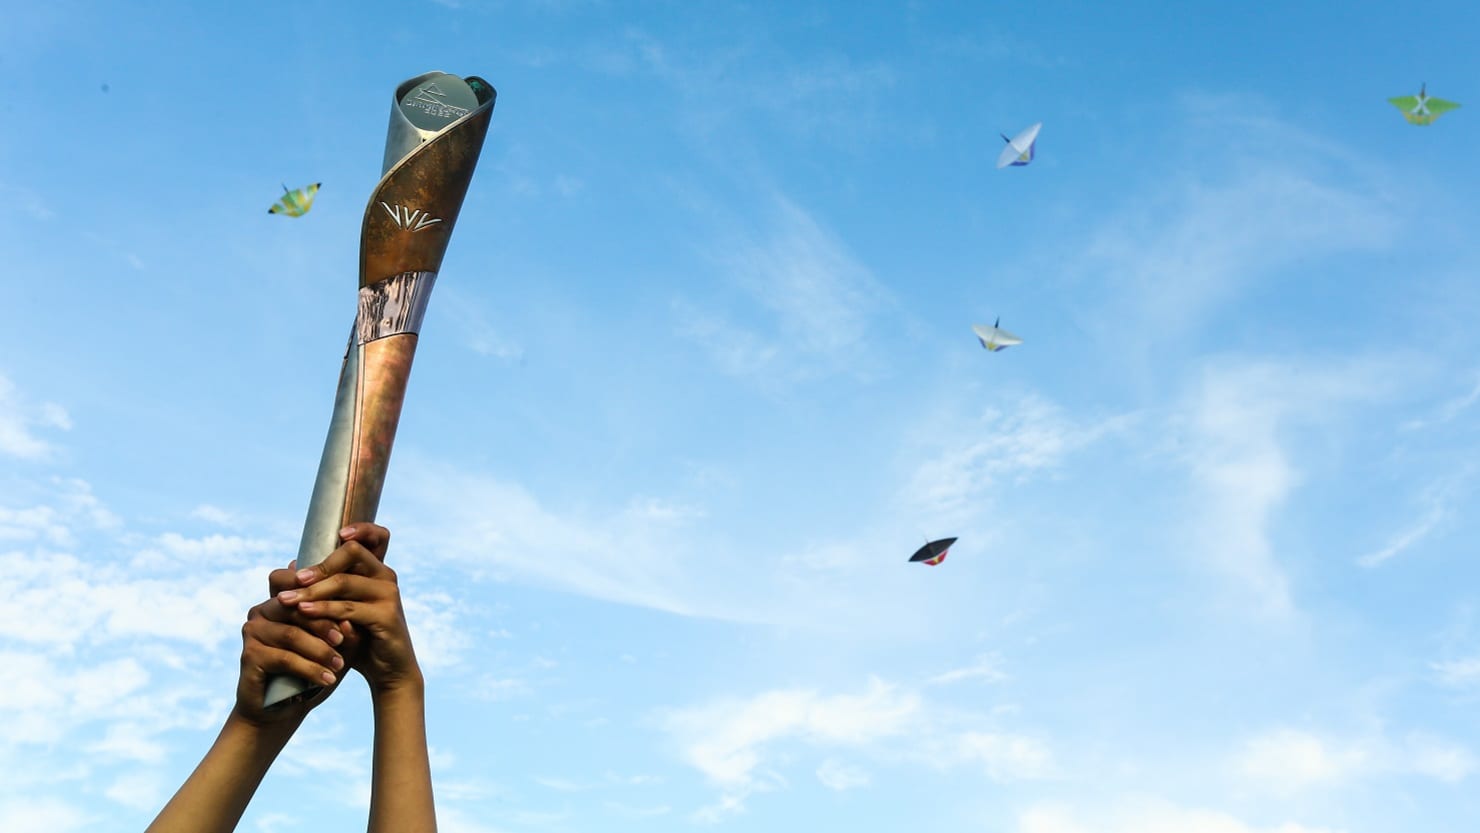 Birmingham 2022 Queen’s Baton Relay to visit Plymouth and The Box